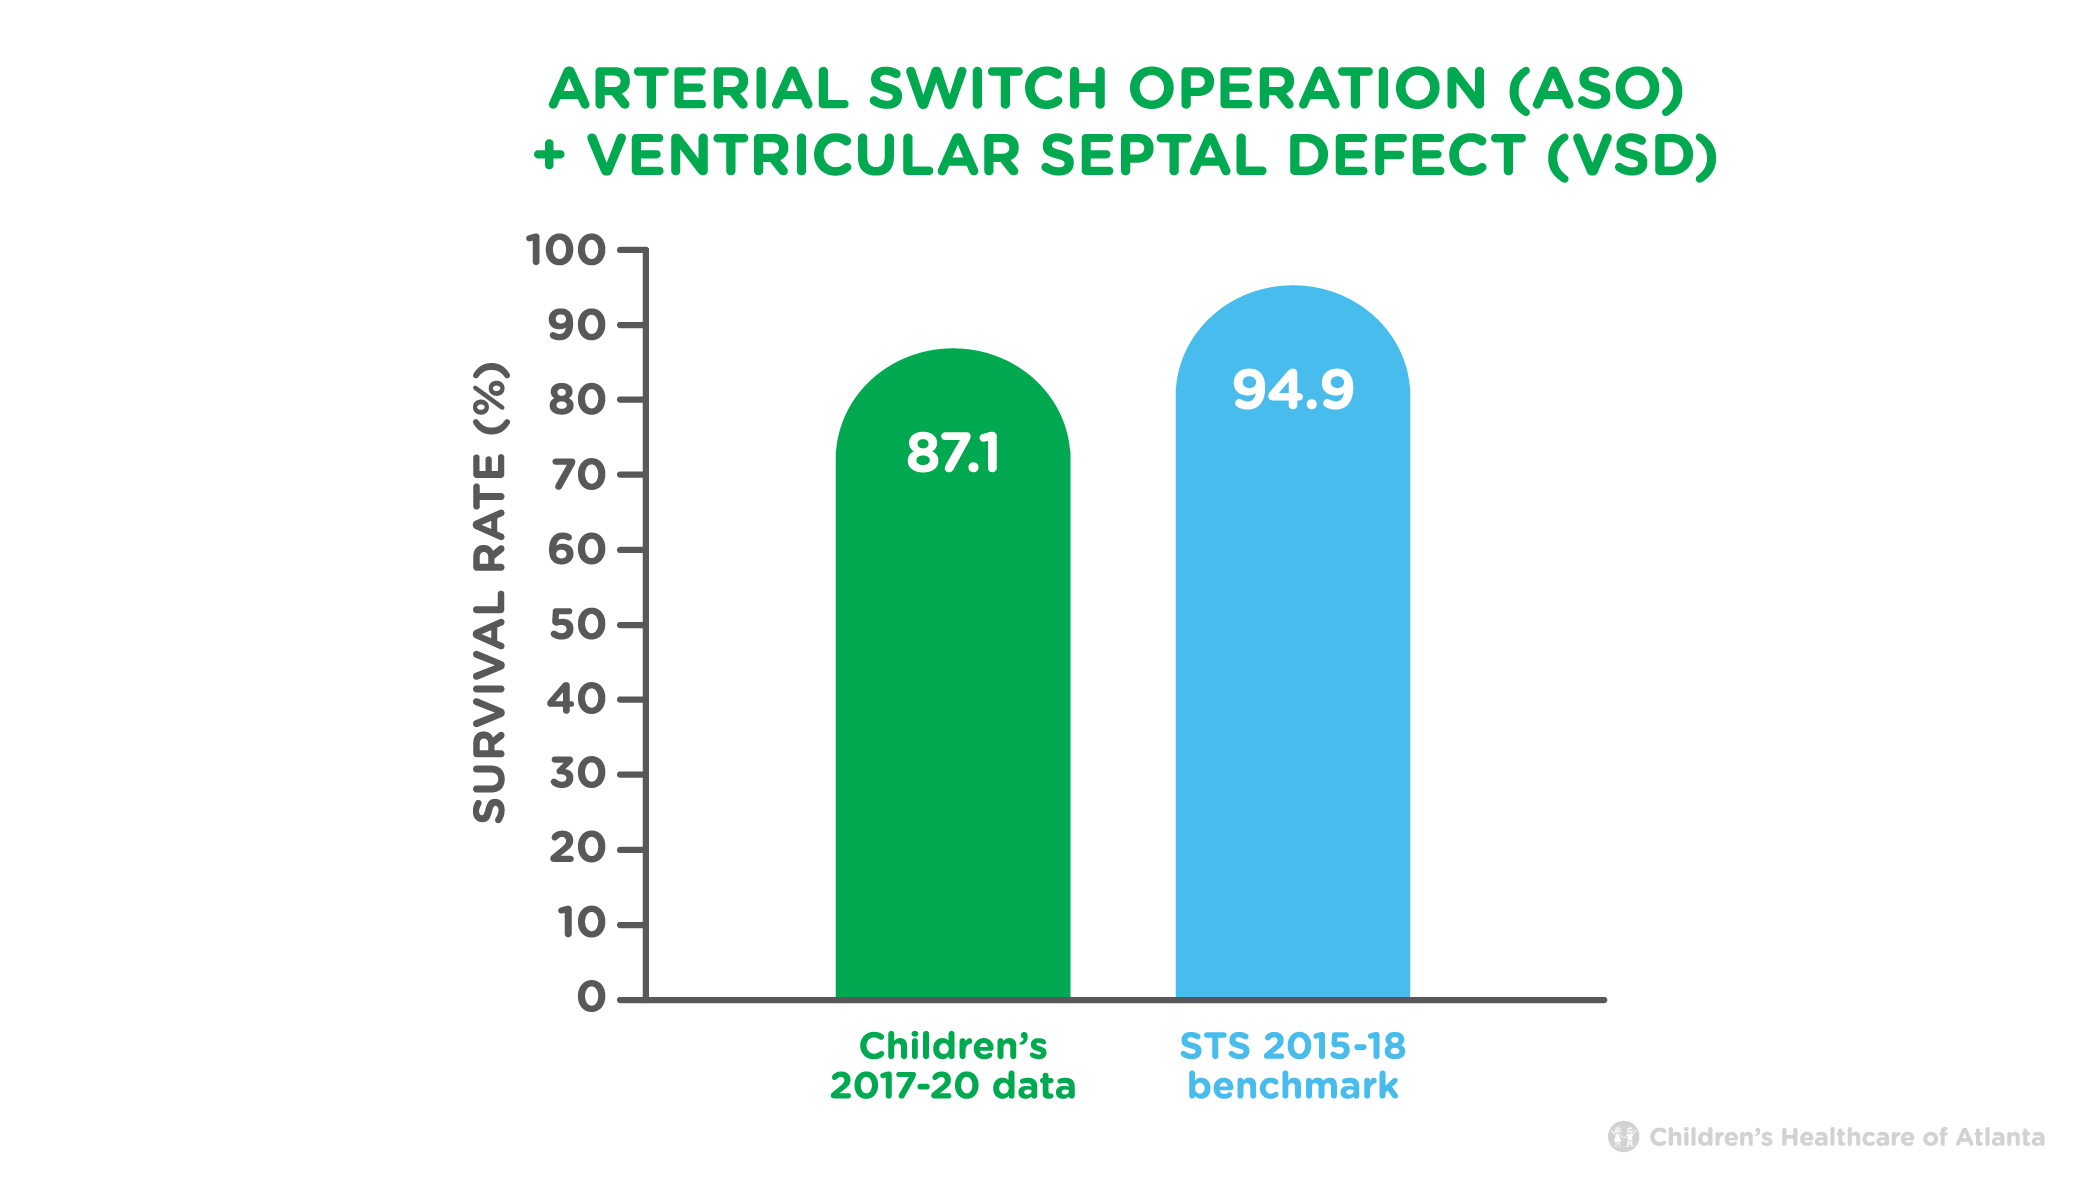 Arterial Switch Operation (ASO) and Ventricular Septal Defect (VSD) Survival Rate